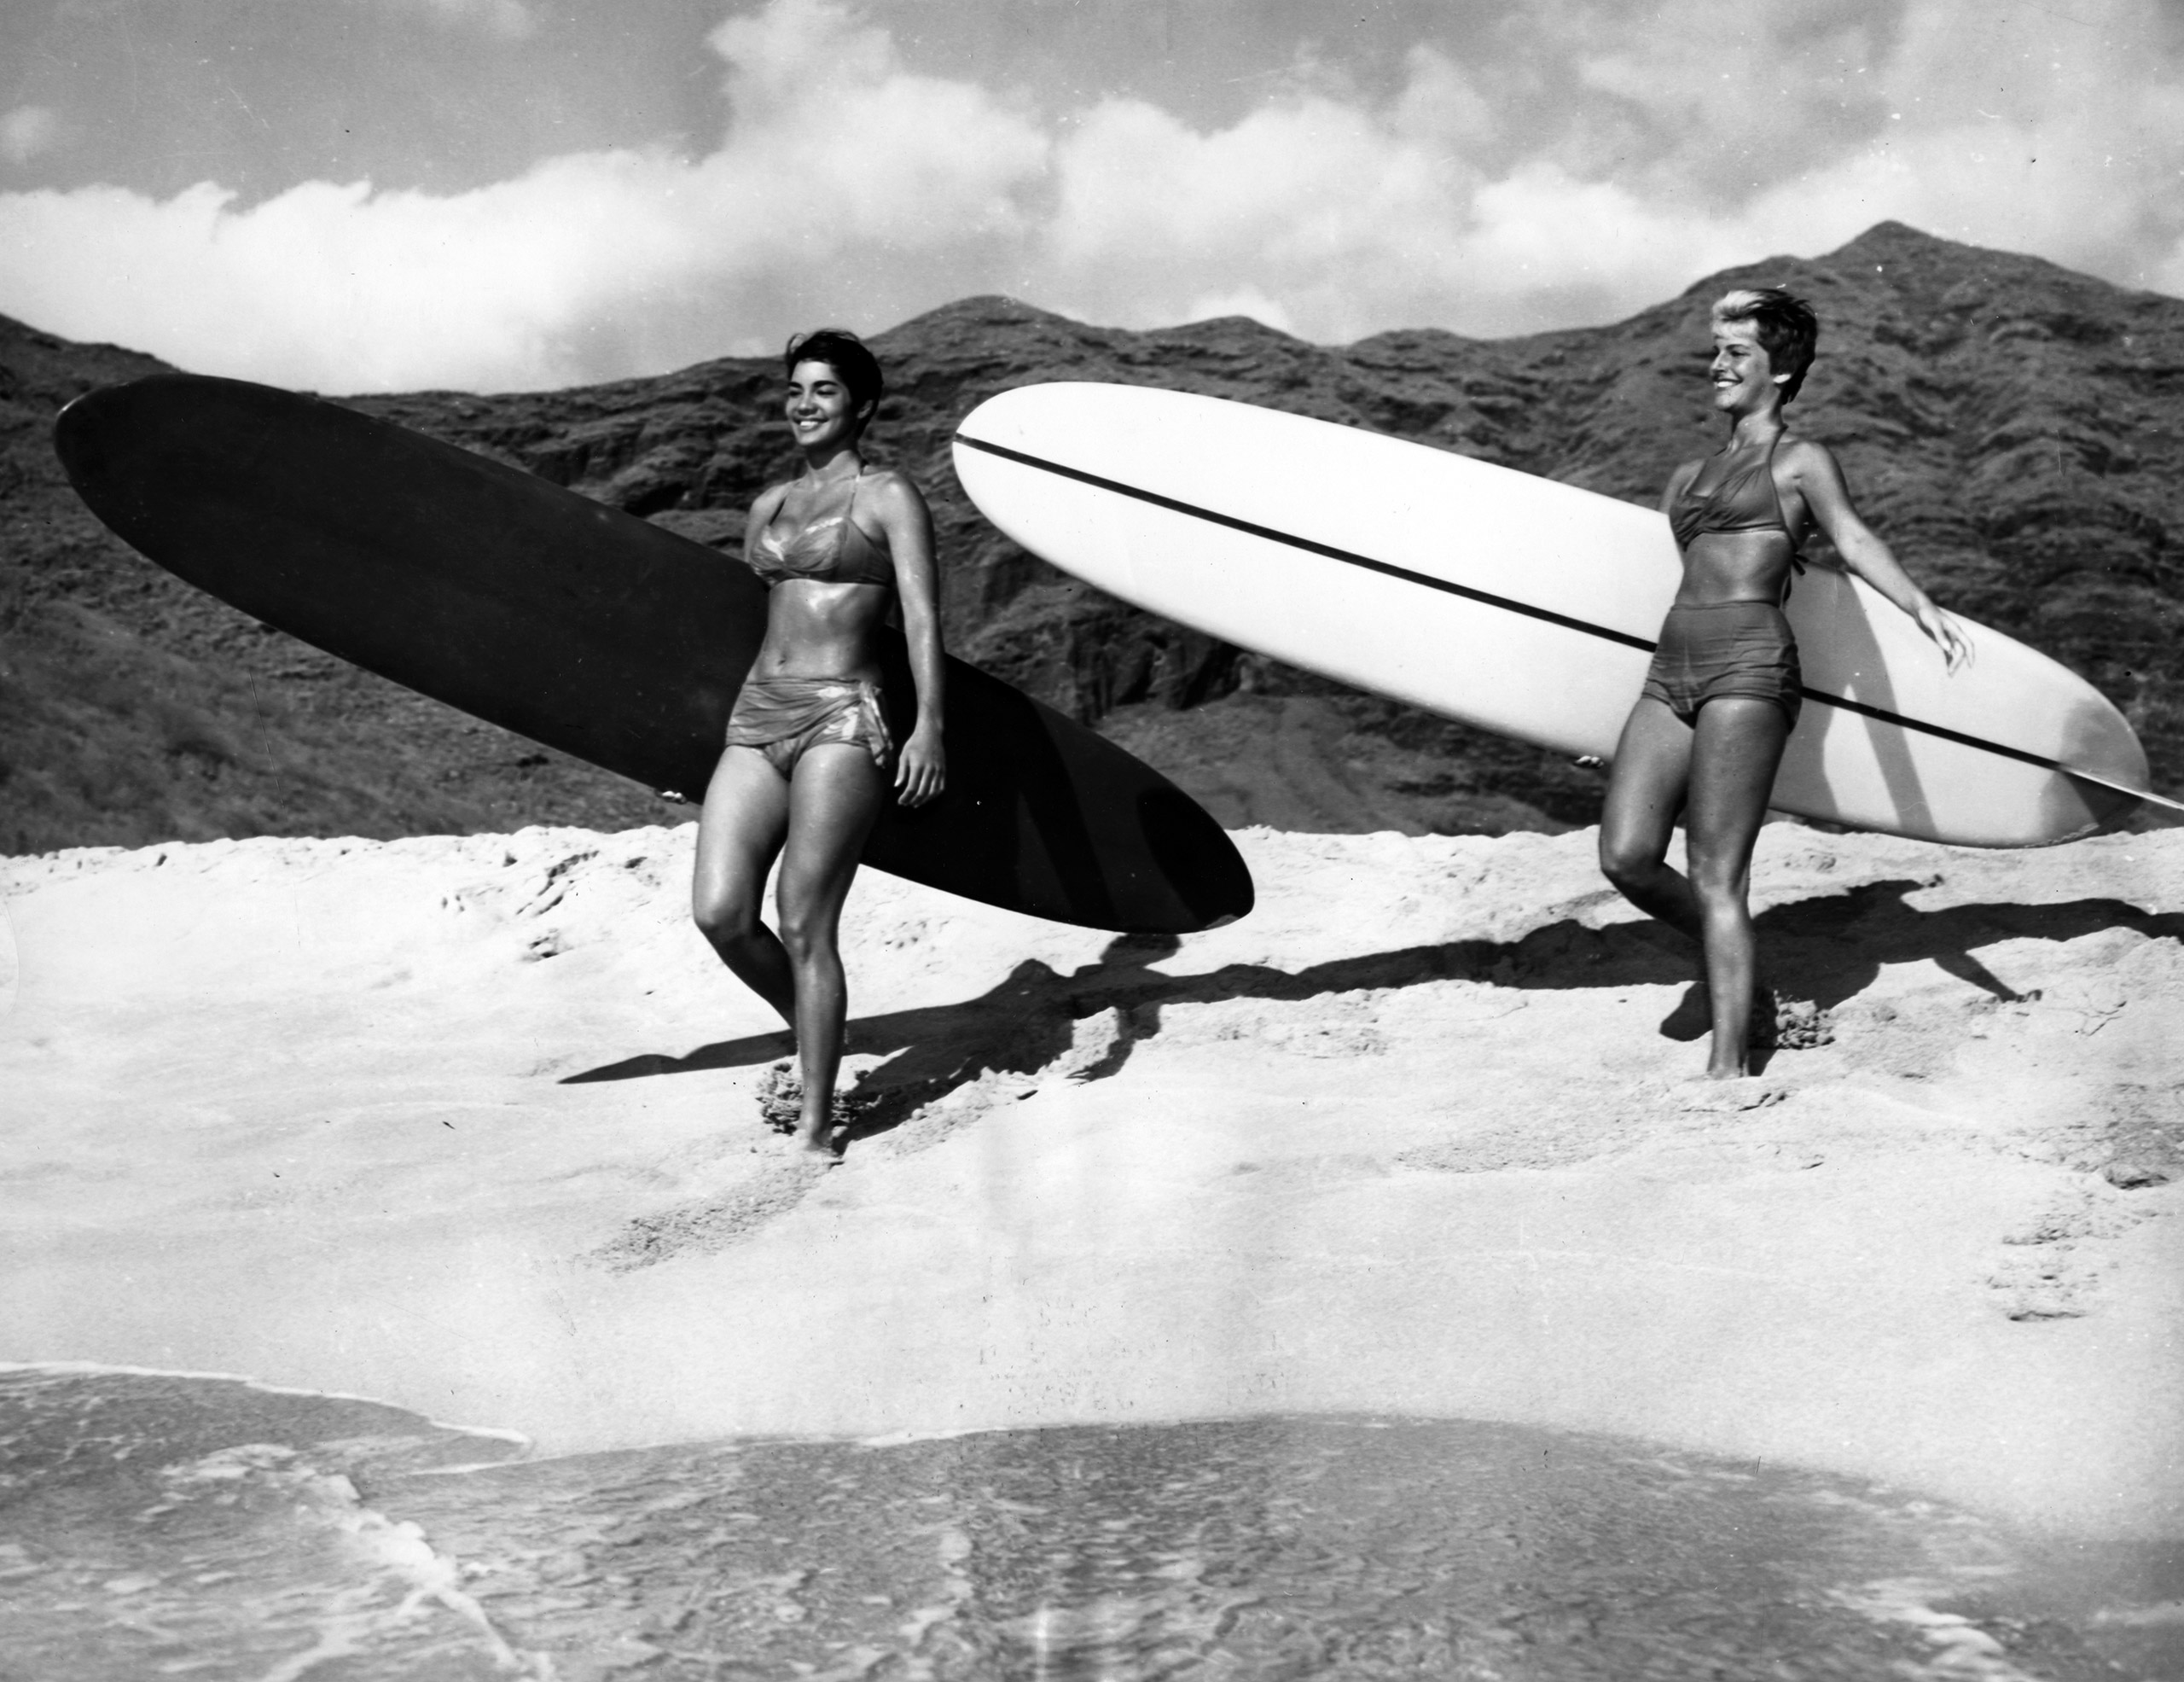 Two women carrying their surfboards at the beach, 1960.